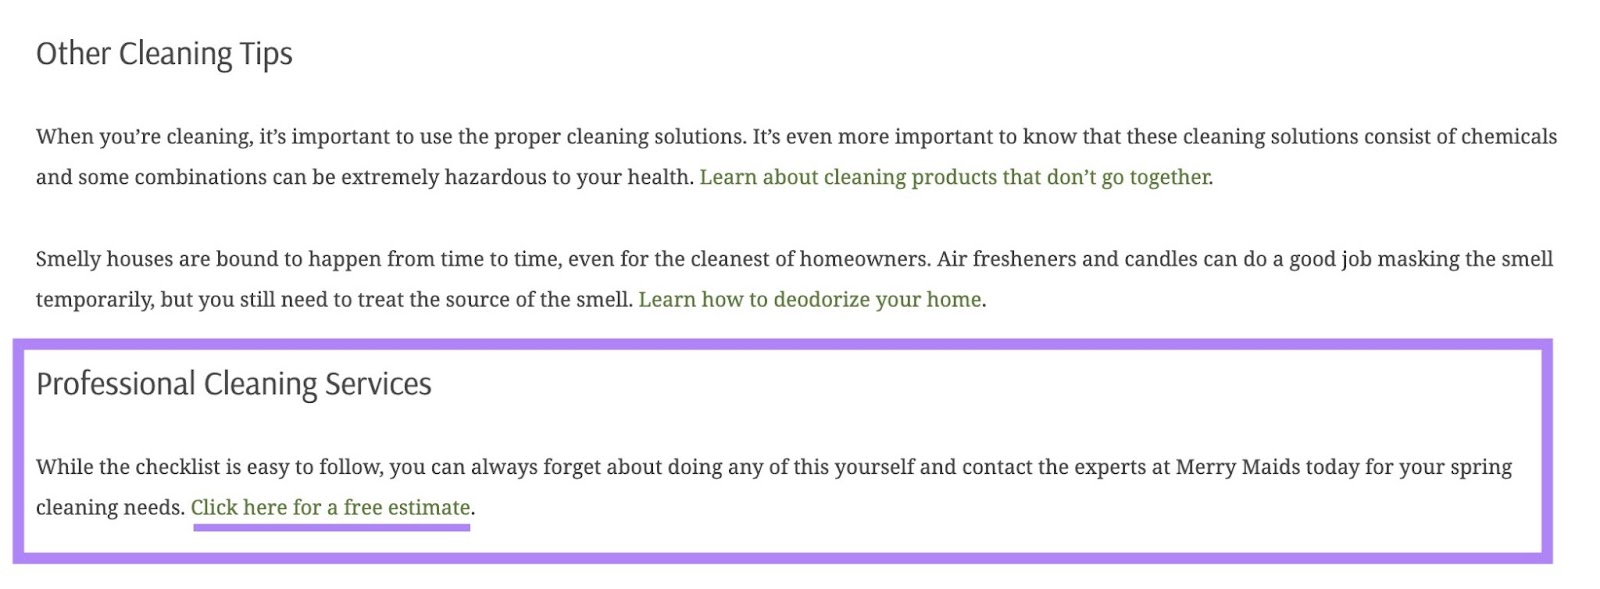 The last paragraph of a blog article by Merry Maids about the brand's cleaning services along with a CTA for a free quote highlighted.